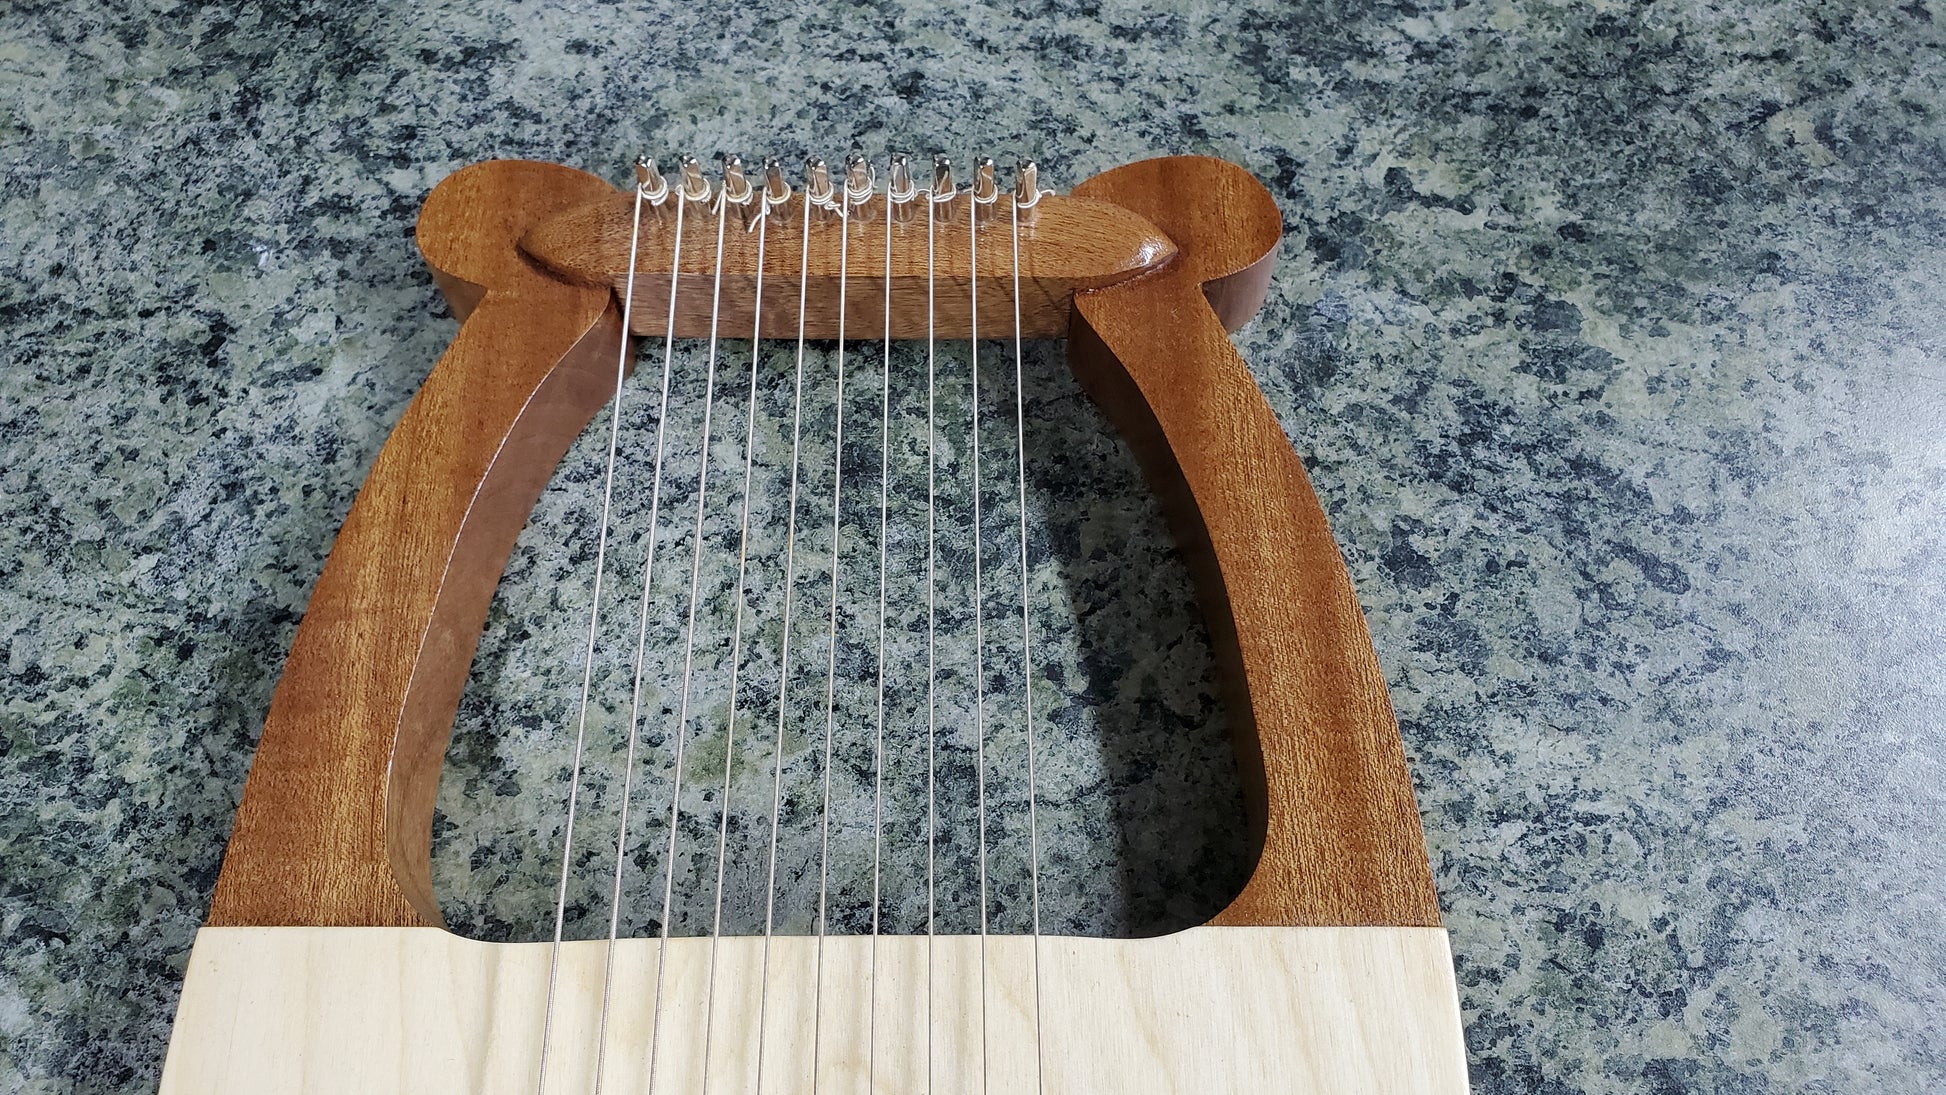 David's Harp with 10 Strings: Detail of Silver Nylon Strings